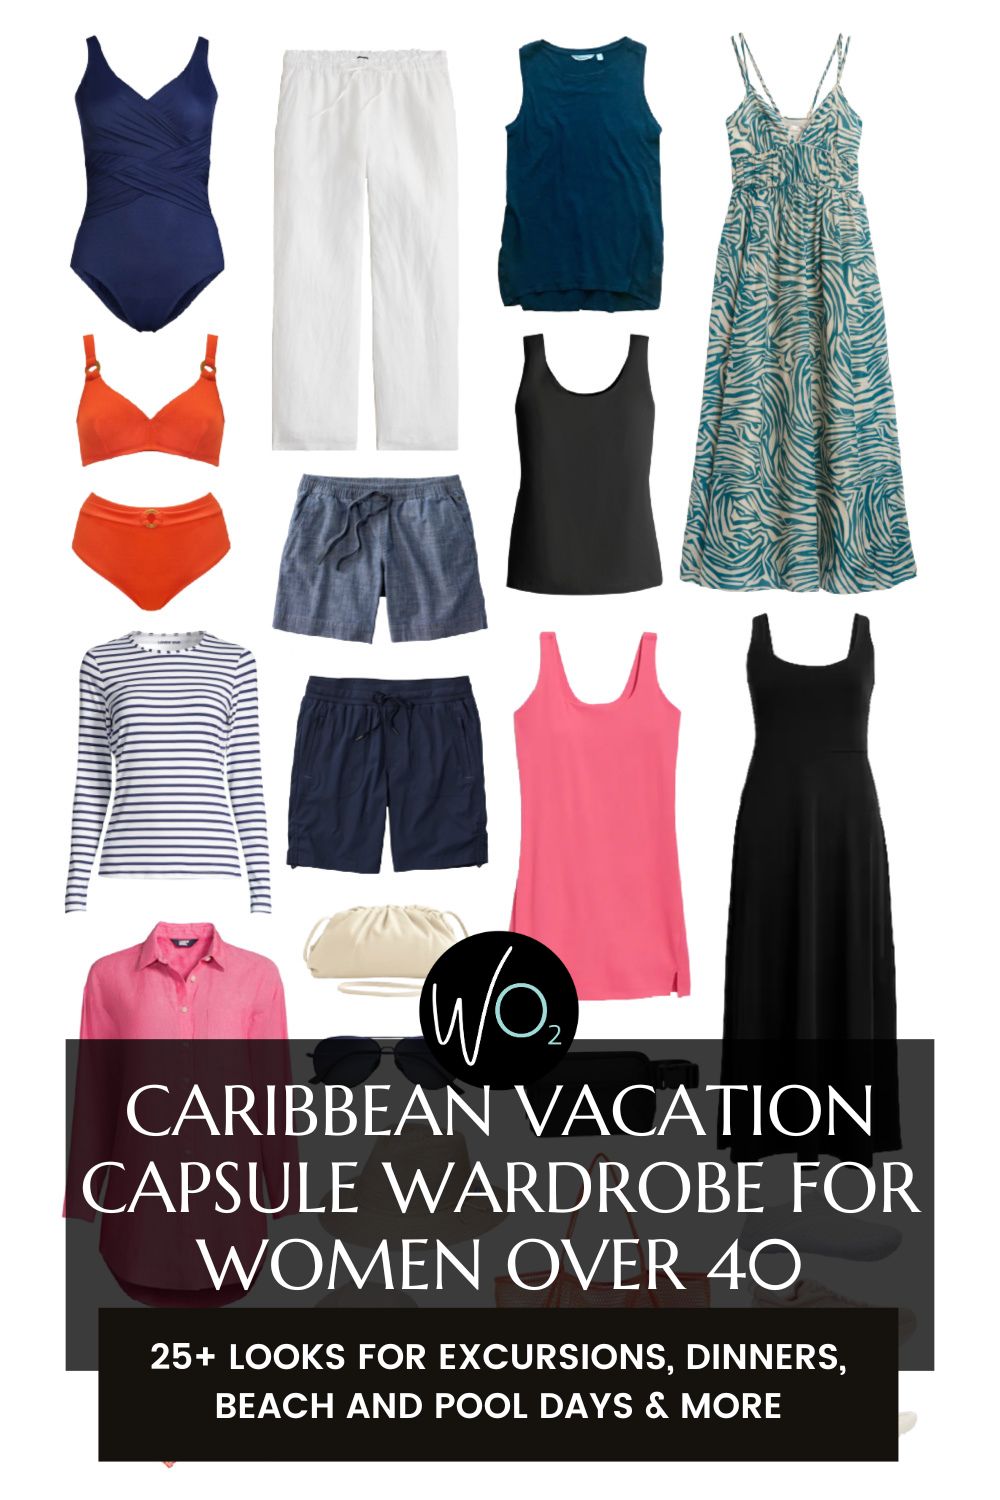 Caribbean Vacation Capsule Wardrobe for Women Over 40